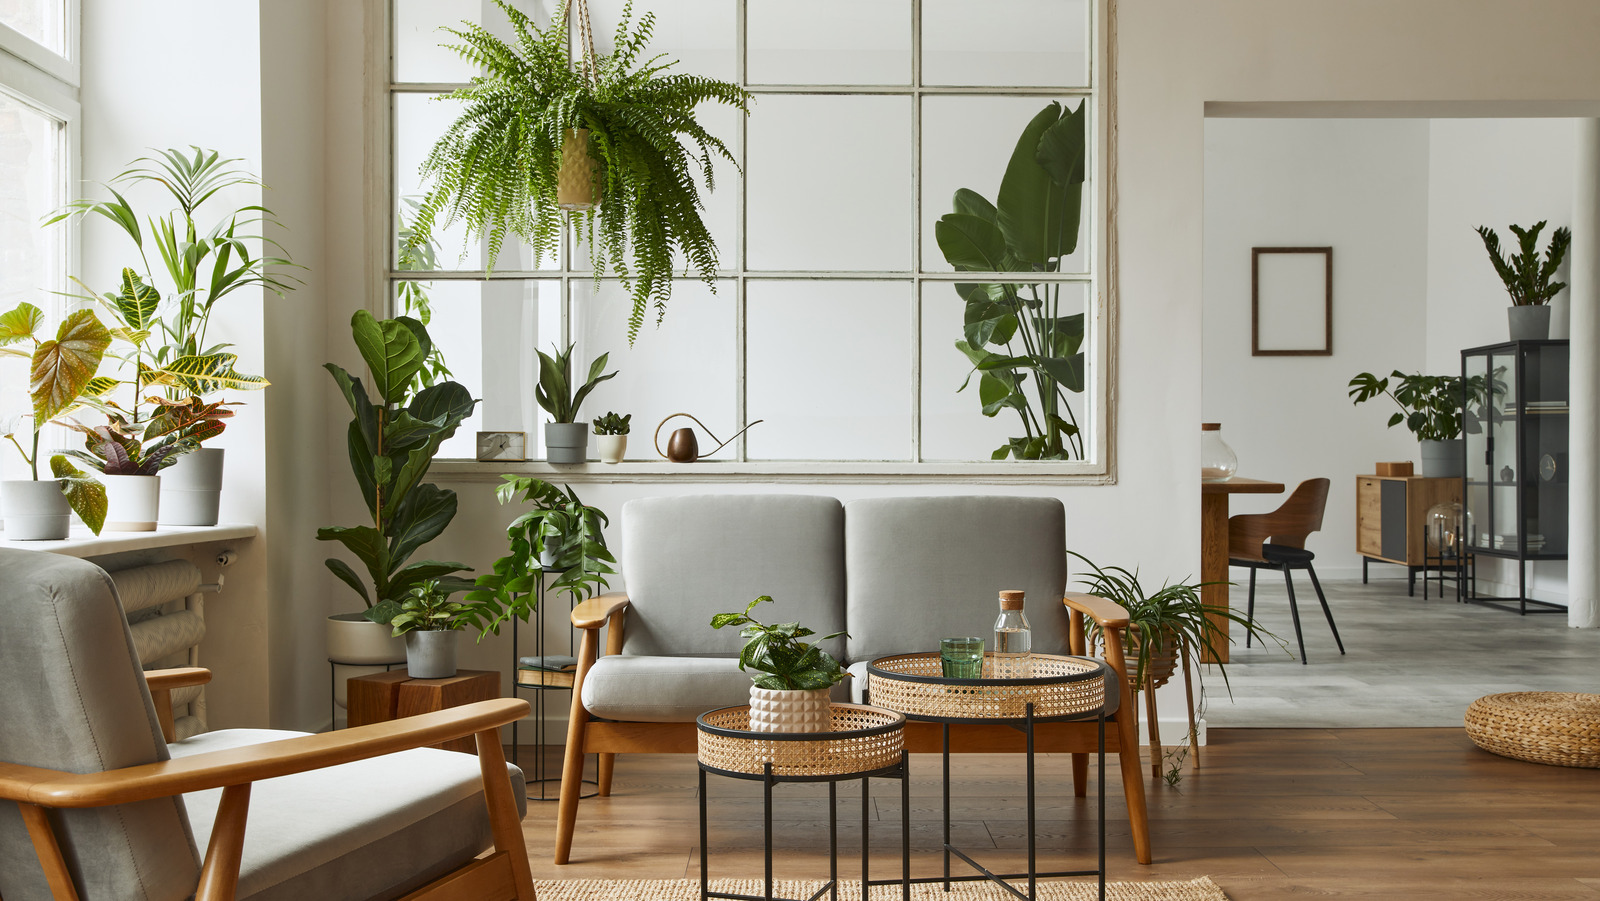 https://www.housedigest.com/img/gallery/how-to-decorate-with-indoor-plants/l-intro-1660007881.jpg